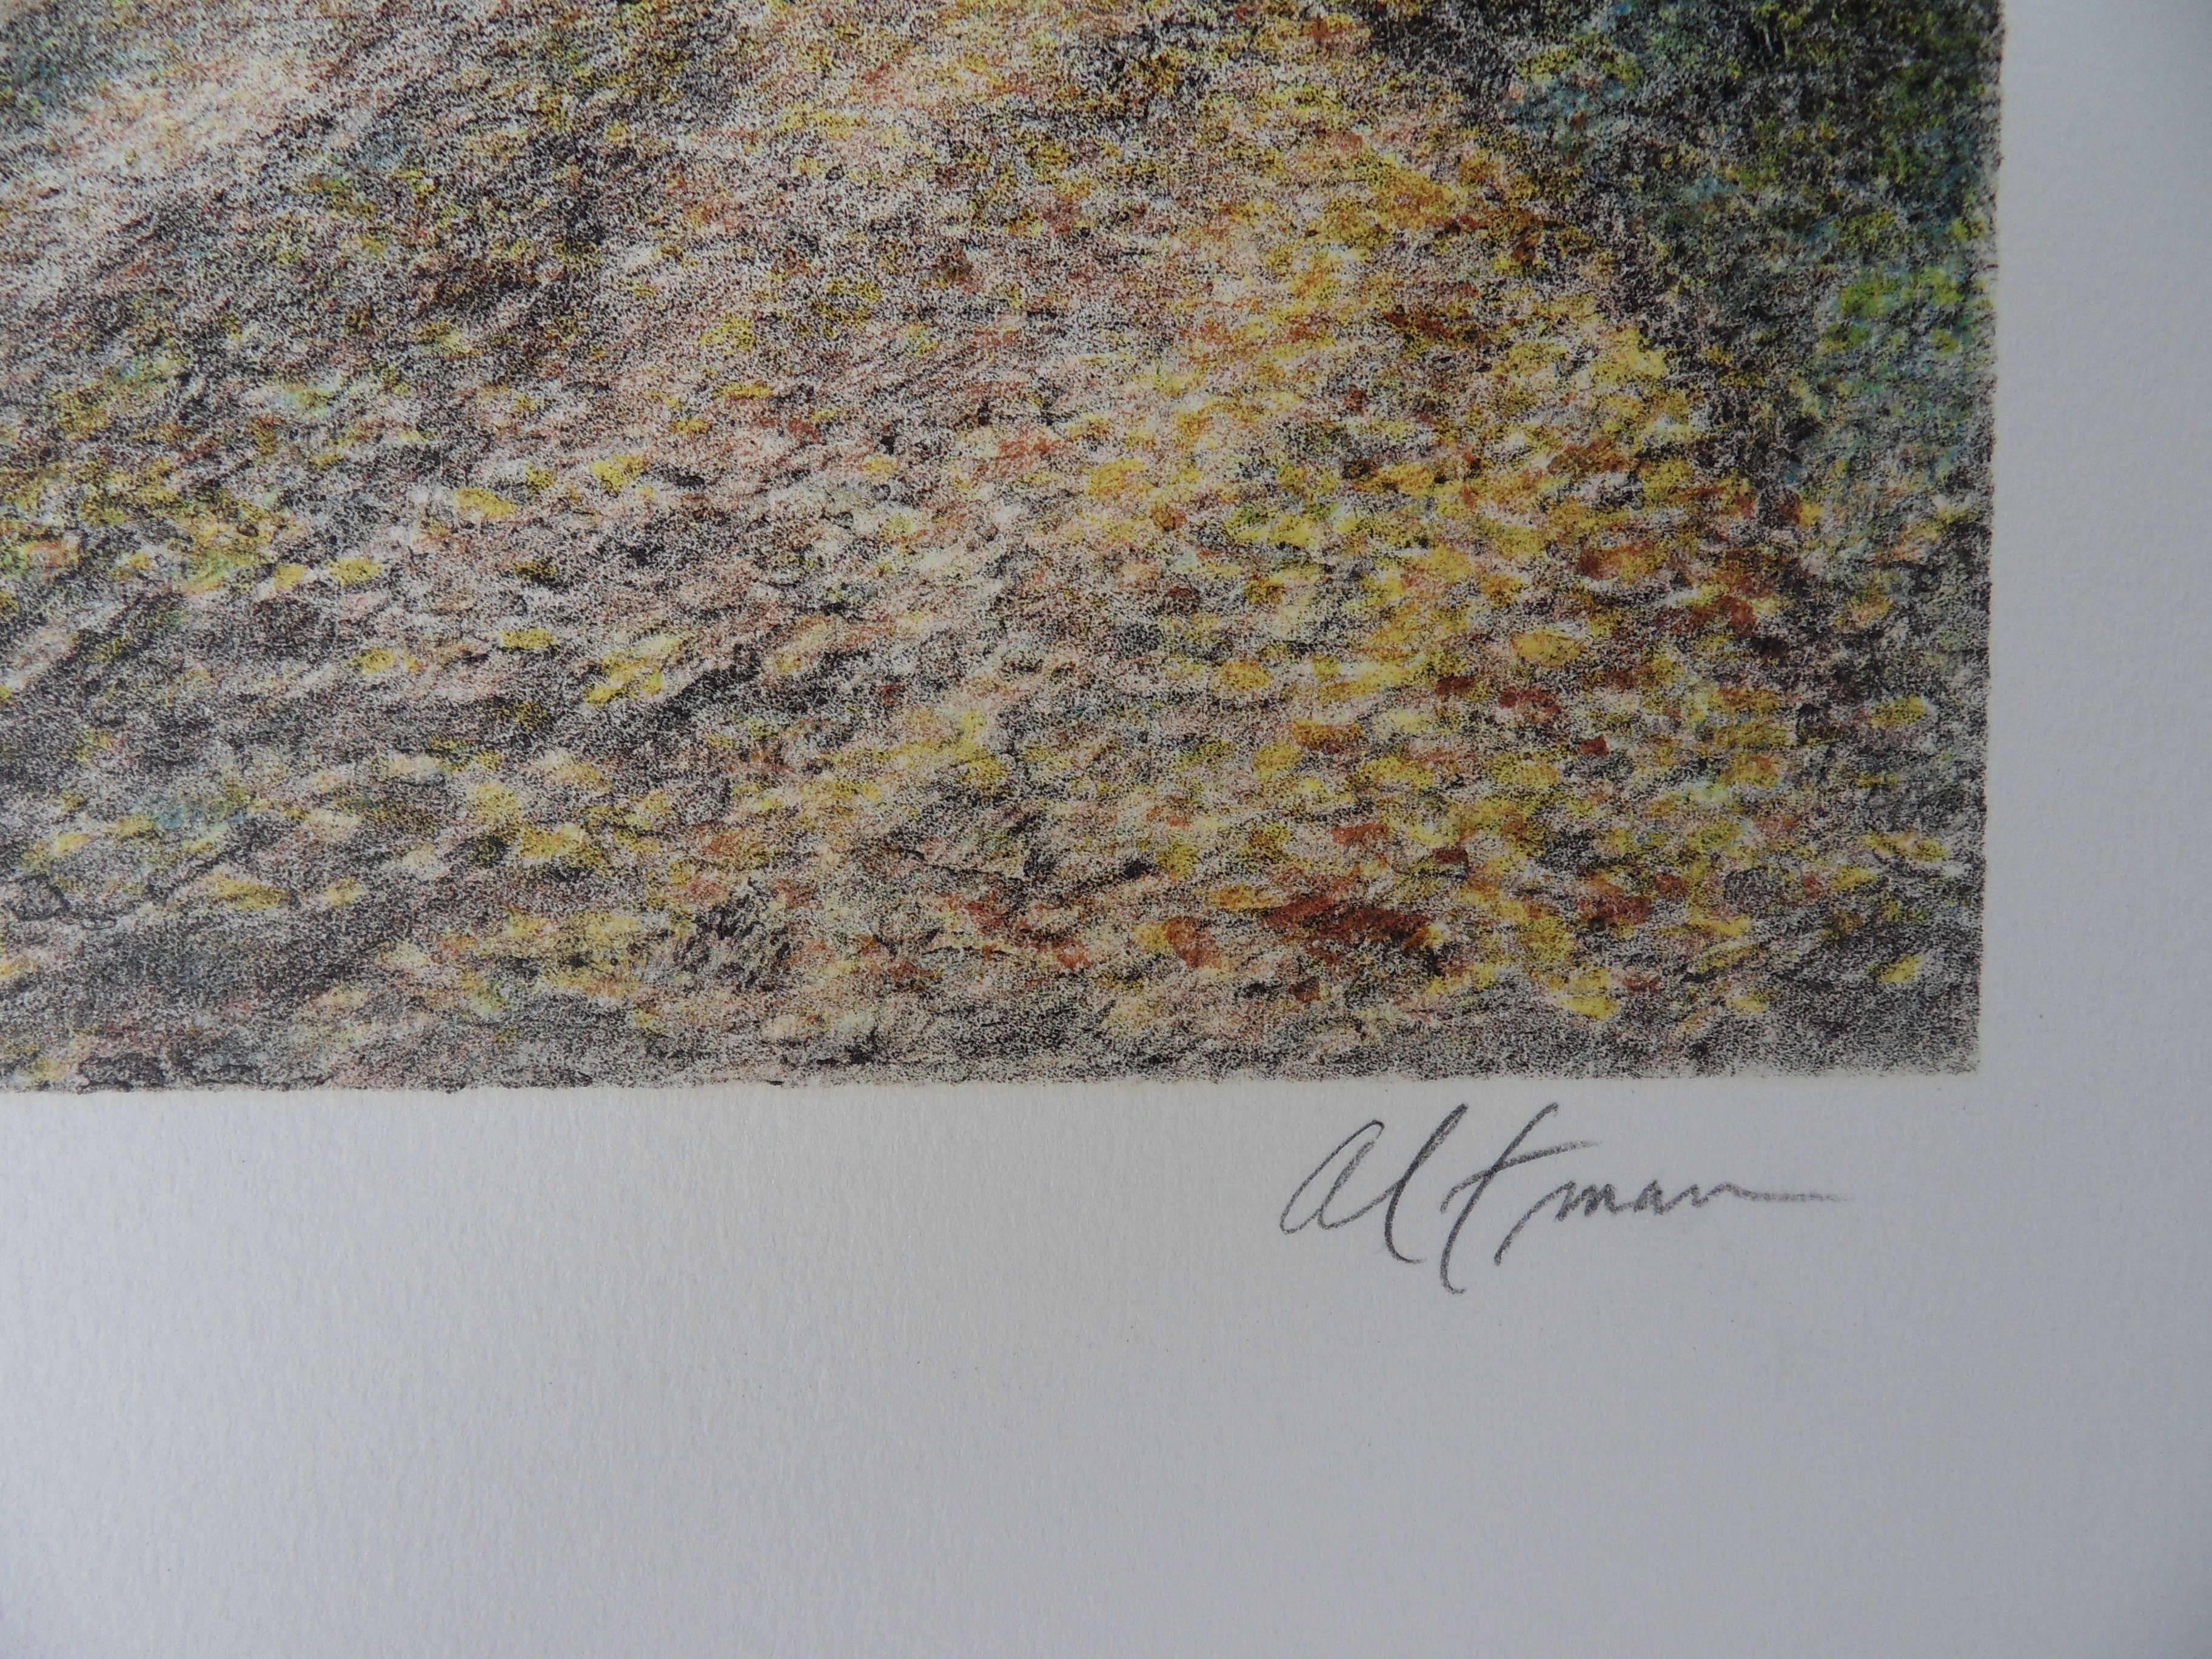 Central Park Views : Mom and Child - Original handsigned lithograph - Print by Harold Altman